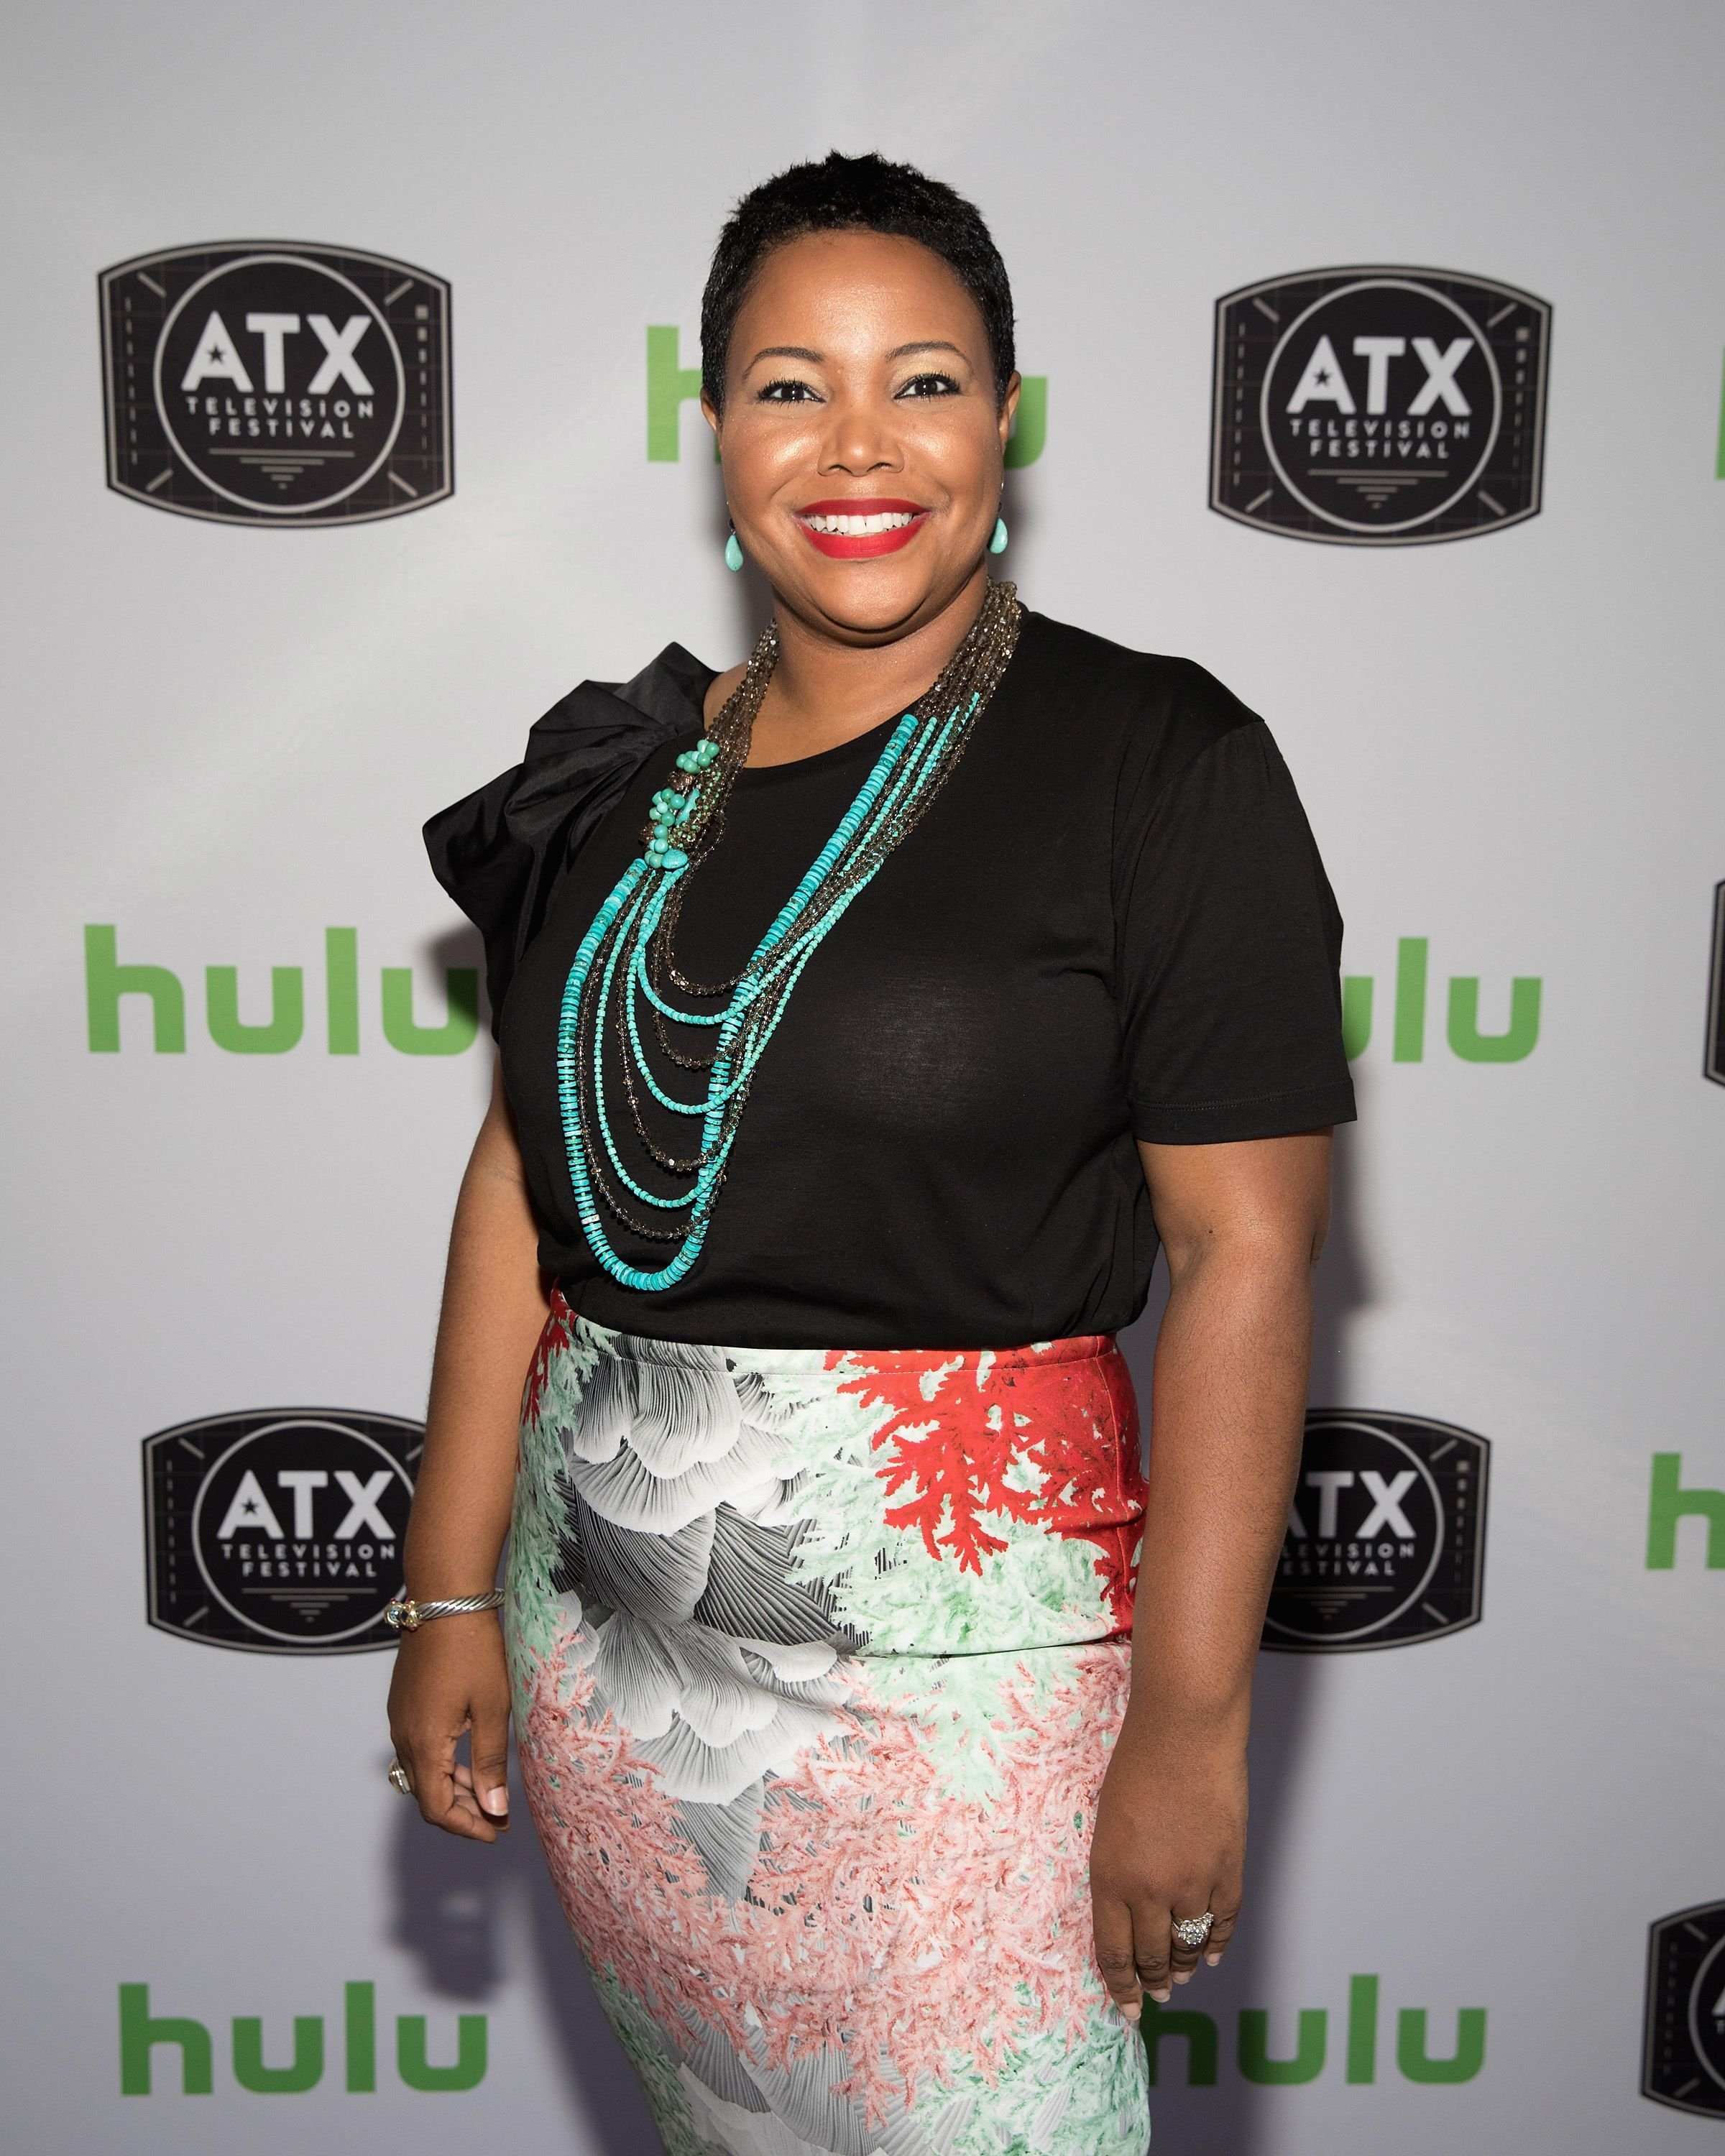 Kellie Shanygne Williams at the Hulu Badgeholder Lounge during the ATX Television Festival at the InterContinental Stephen F. Austin on June 8, 2018 | Photo: Getty Images